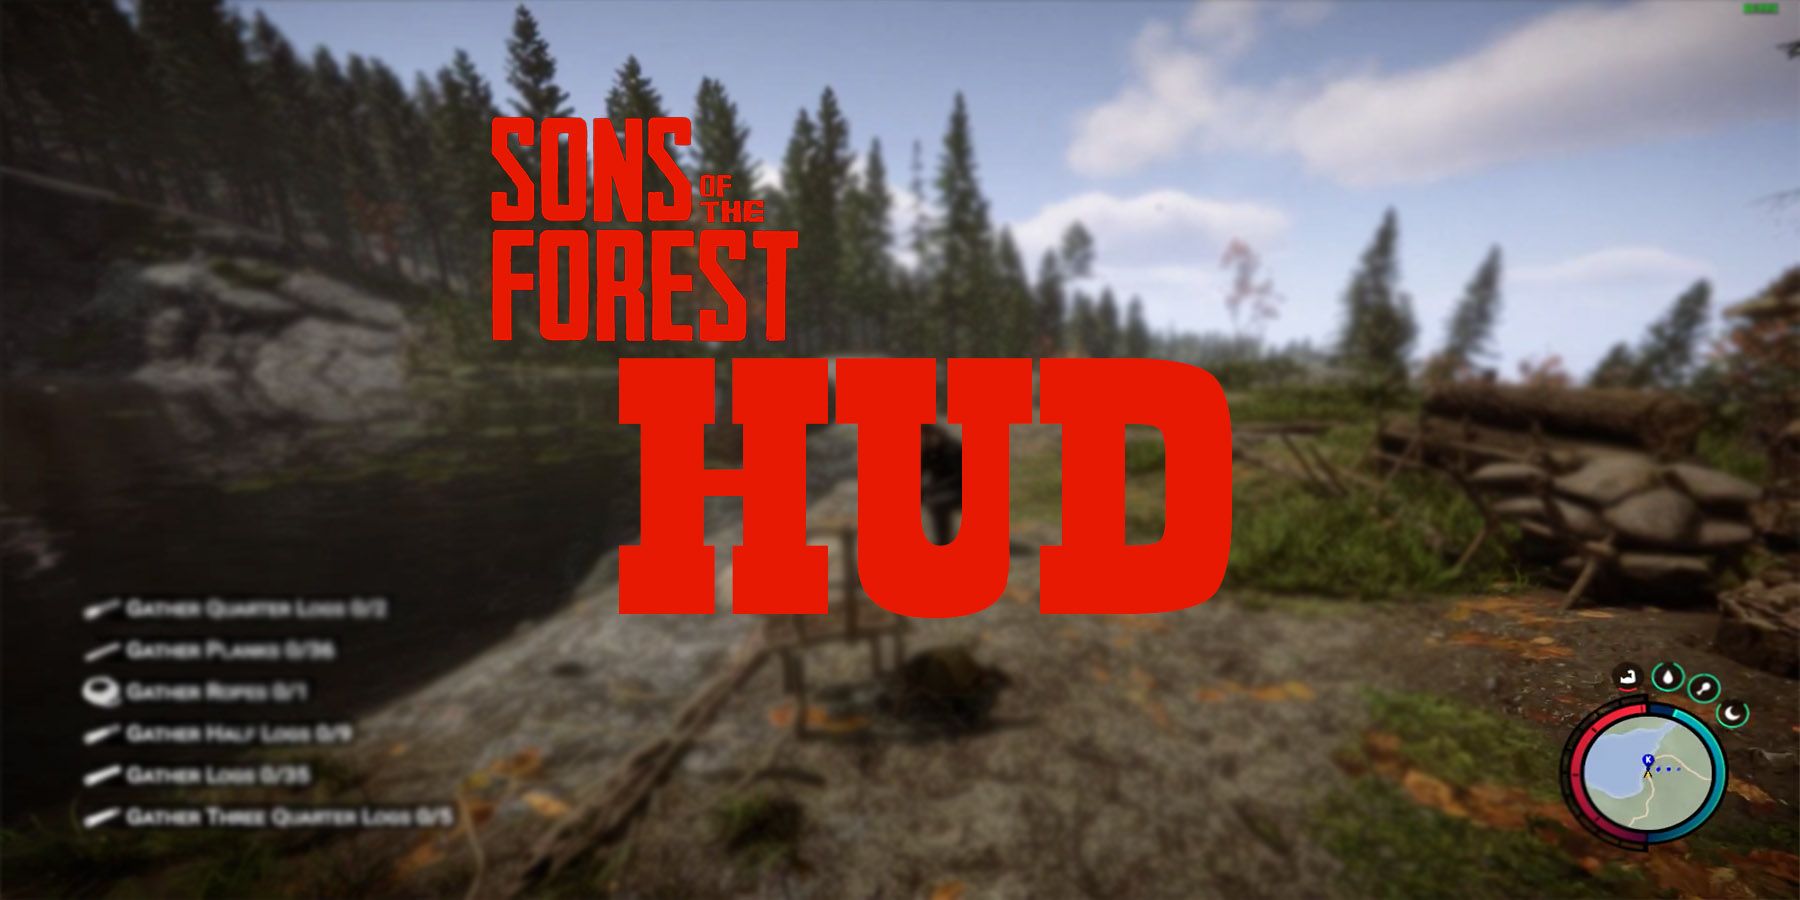 Sons of the Forest how to build and crafting explained